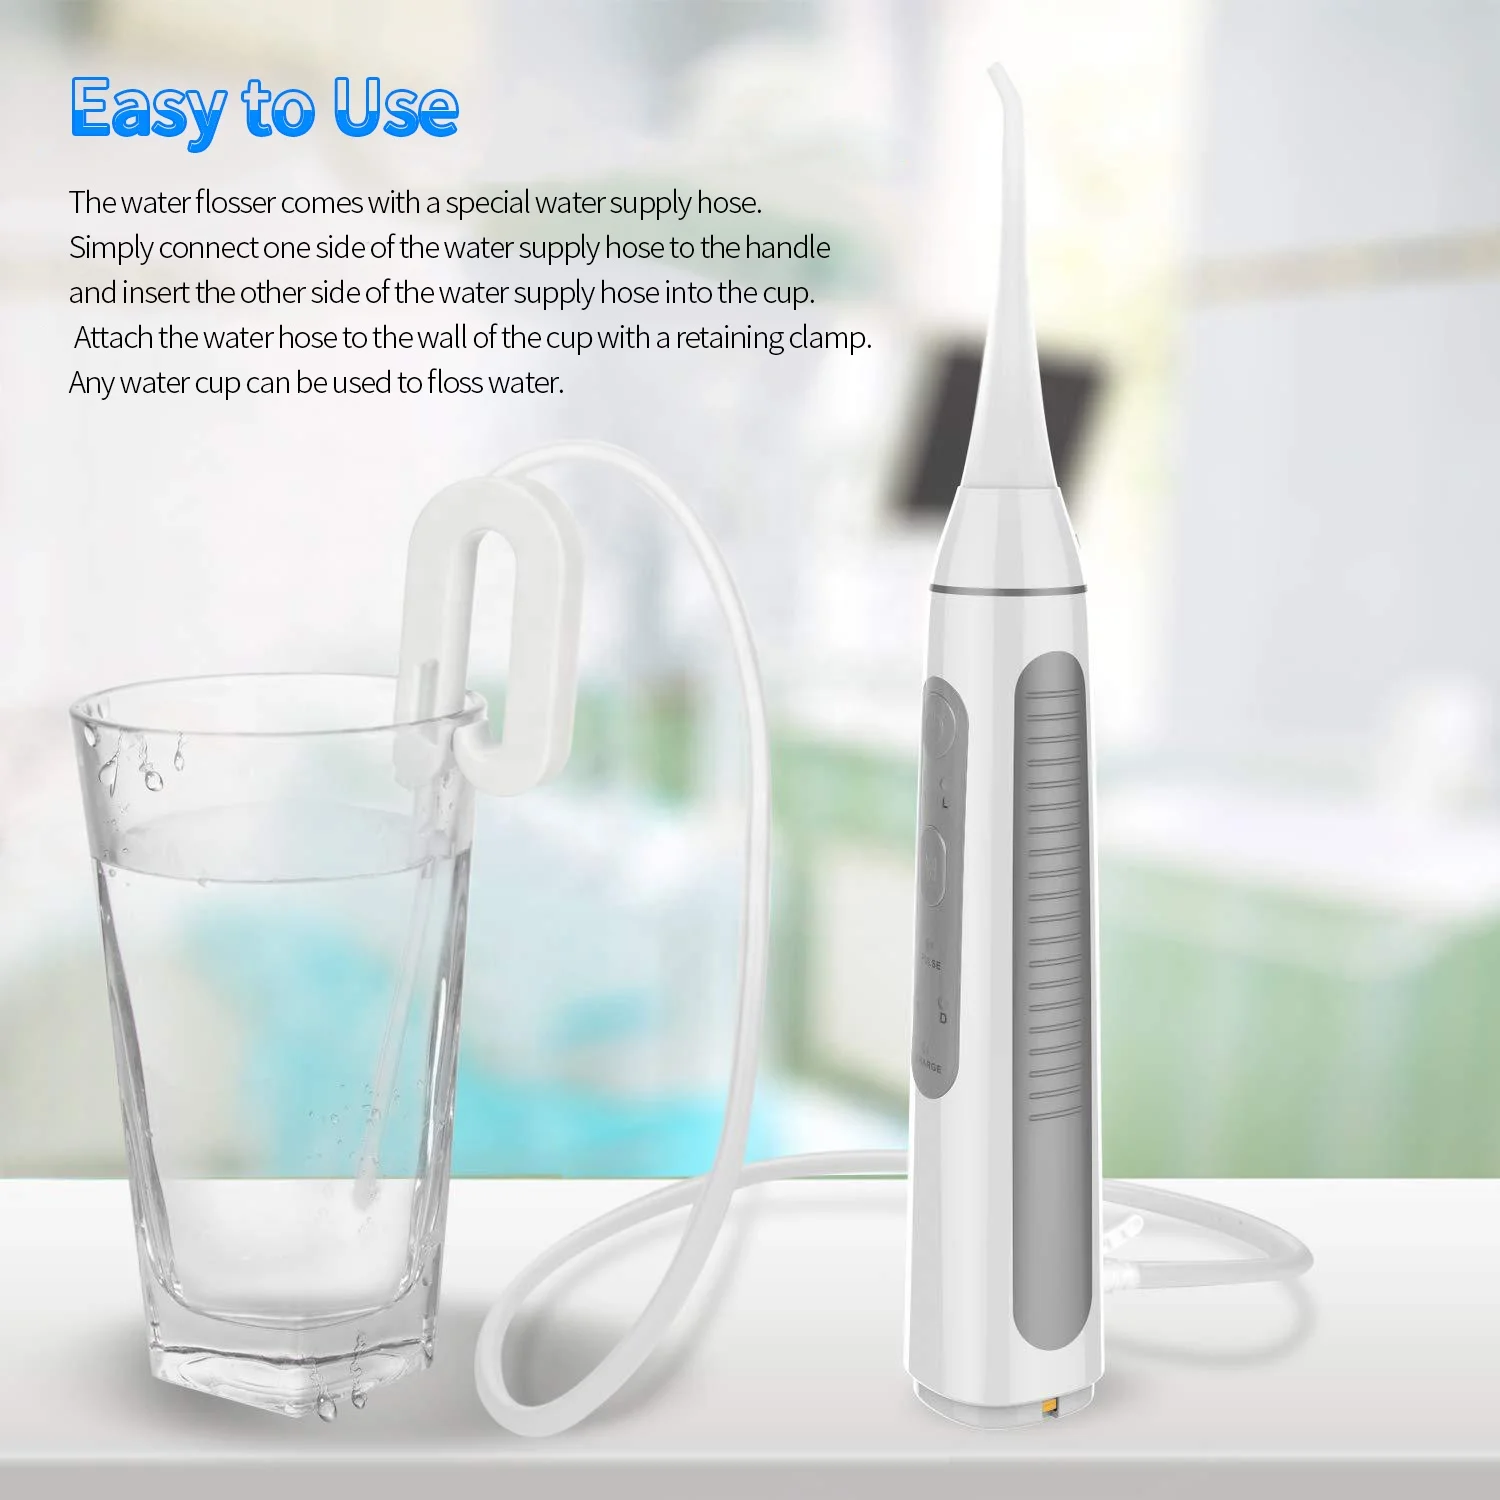 3 cleaning modes USB charging powerful oral irrigator and toothbrush